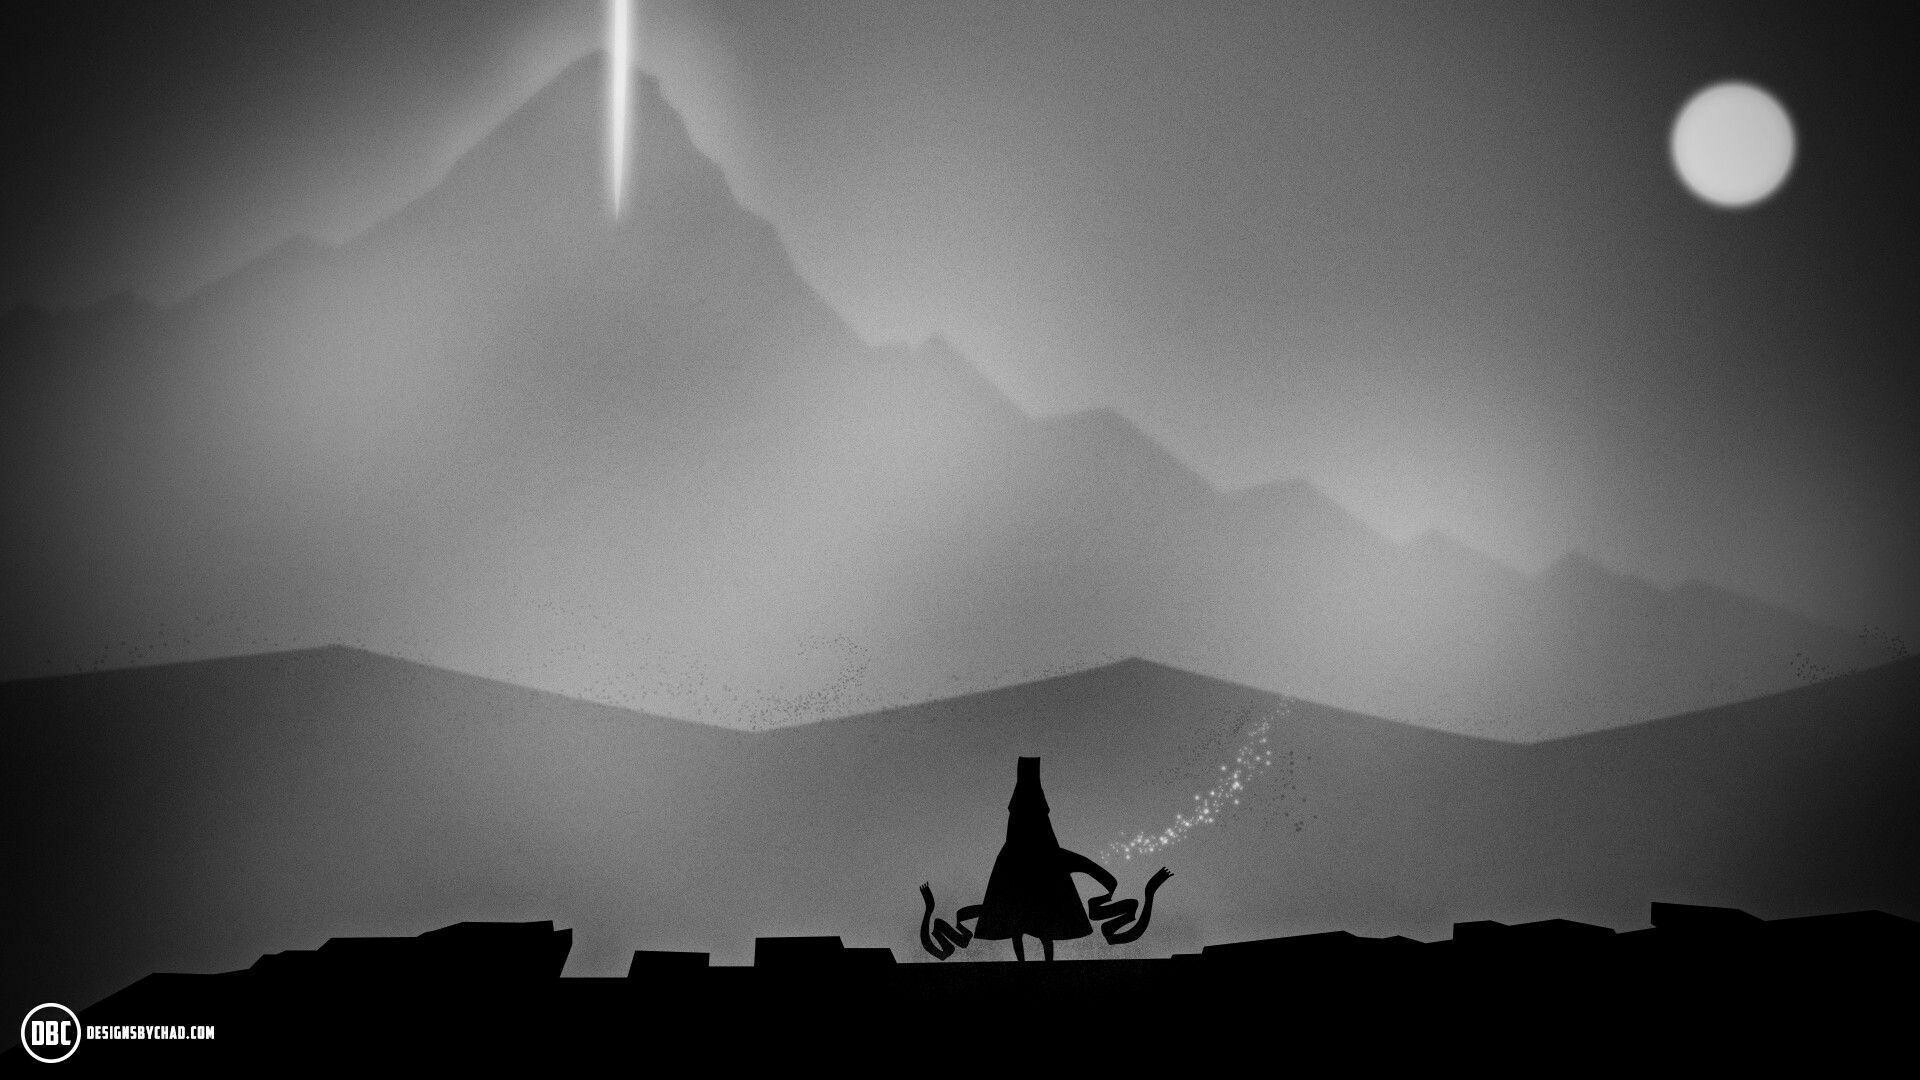 Limbo: This game follows the story of a boy looking for his sister, though nothing is explicitly shown or told to the player. 1920x1080 Full HD Background.